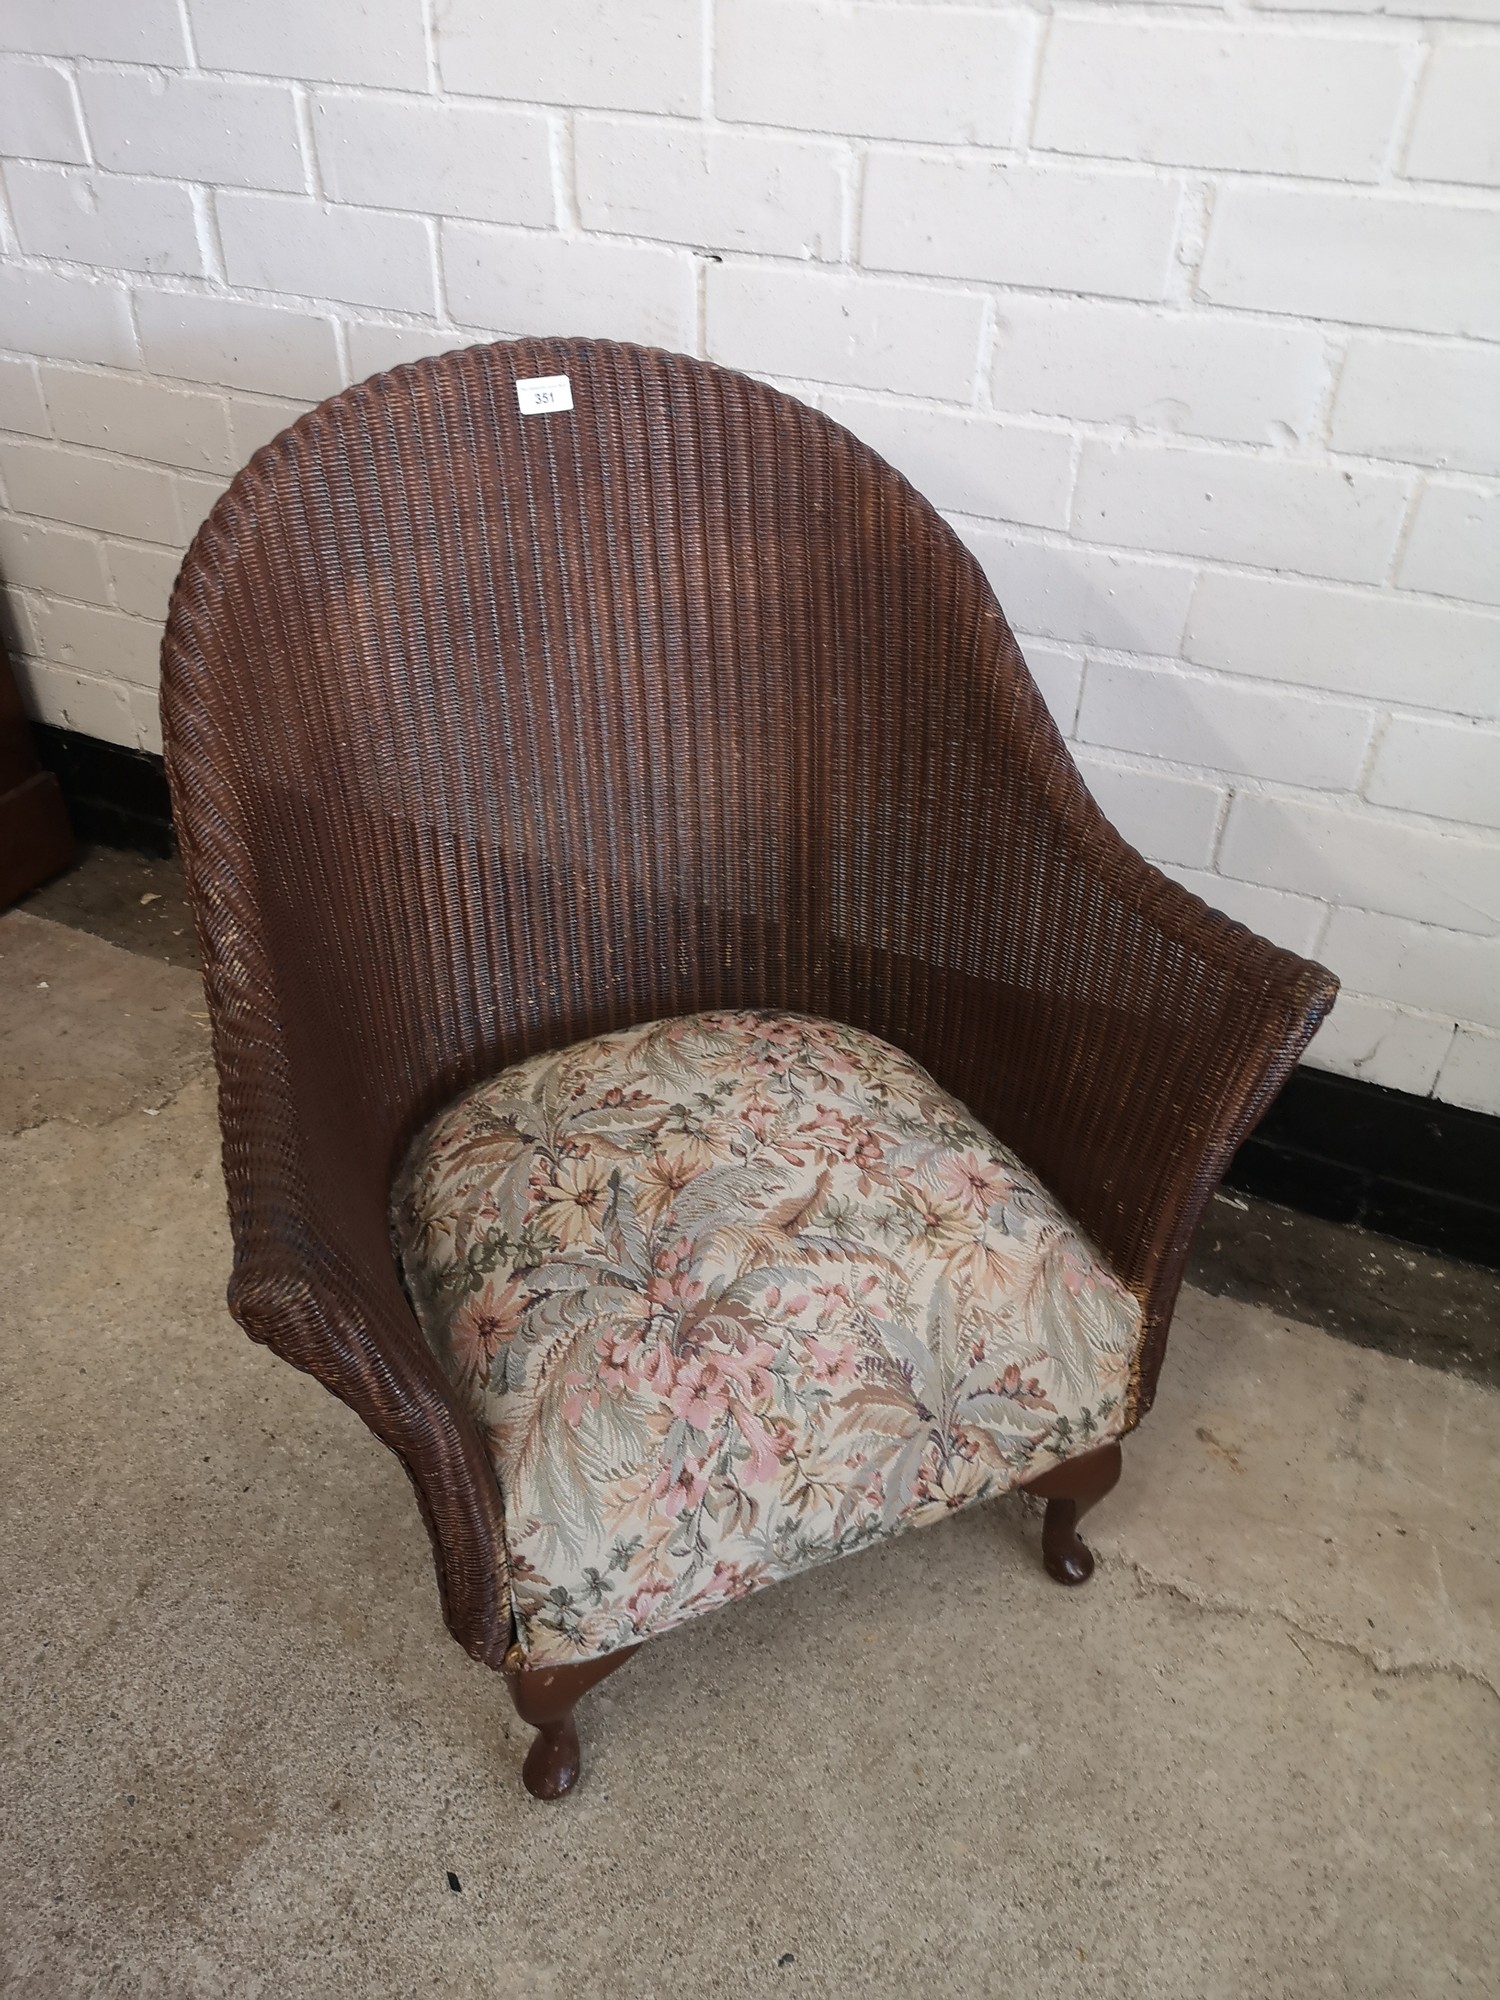 Lloyd loom style wicker chair with upholstery.